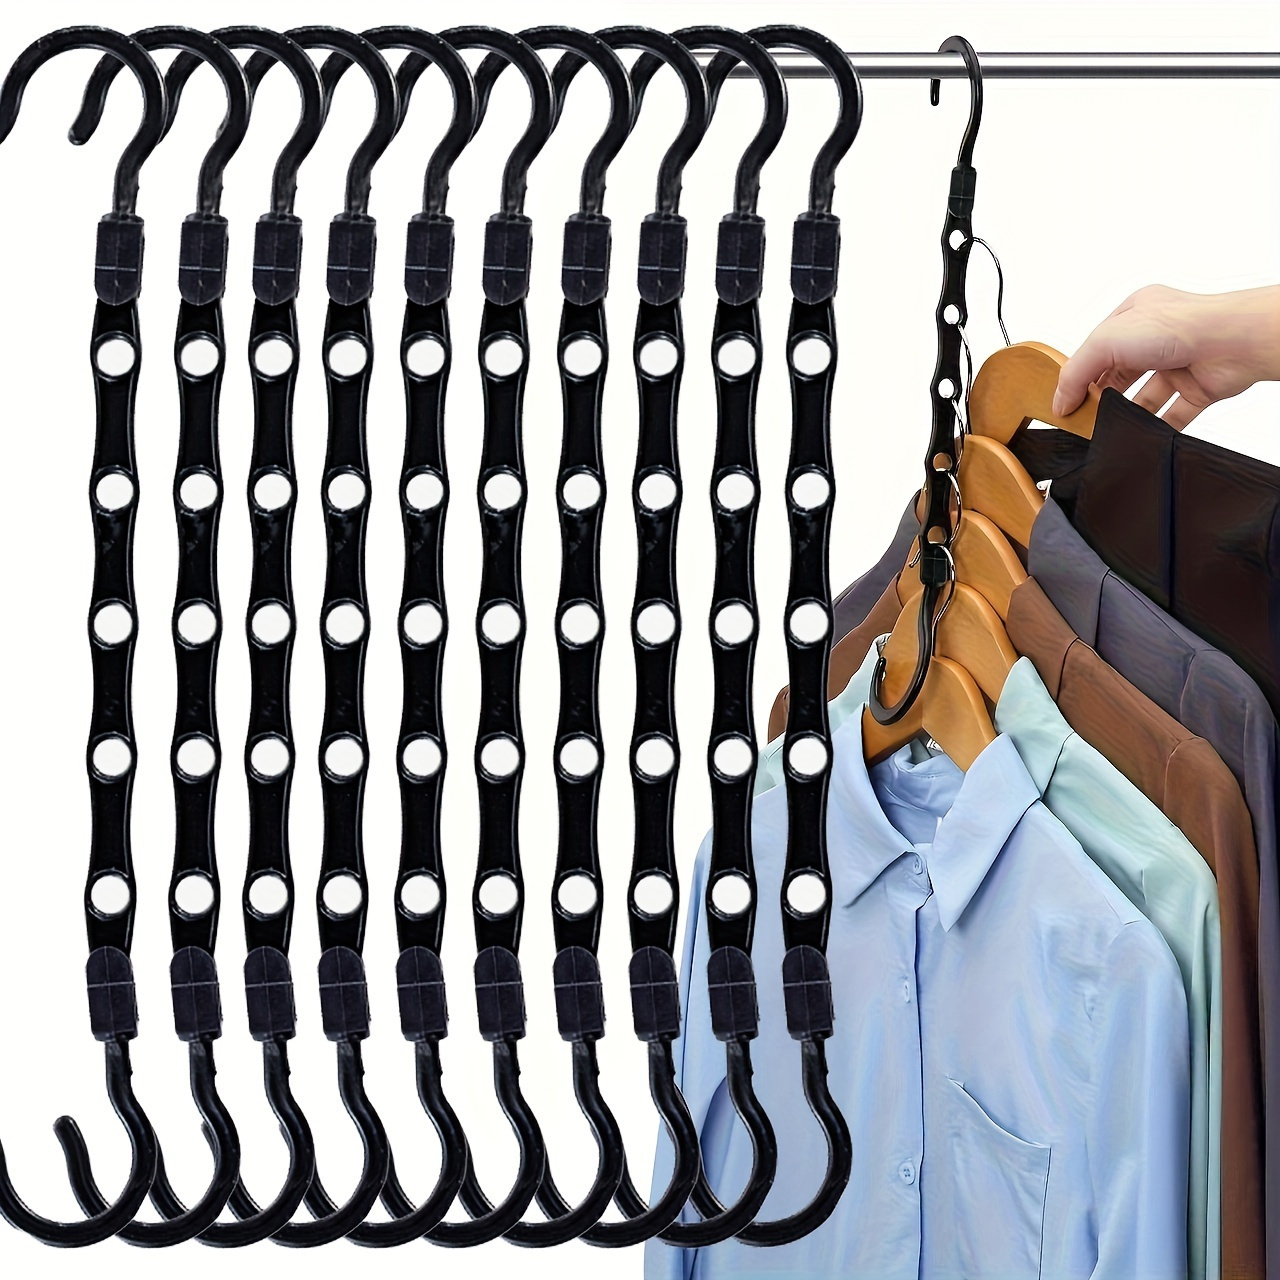 

10pcs Magic Hangers Space Saving Hangers Closet Space Saver Hanger Organizer Multi Hangers Sturdy Plastic For Heavy Clothes Storage For Clothing Stores